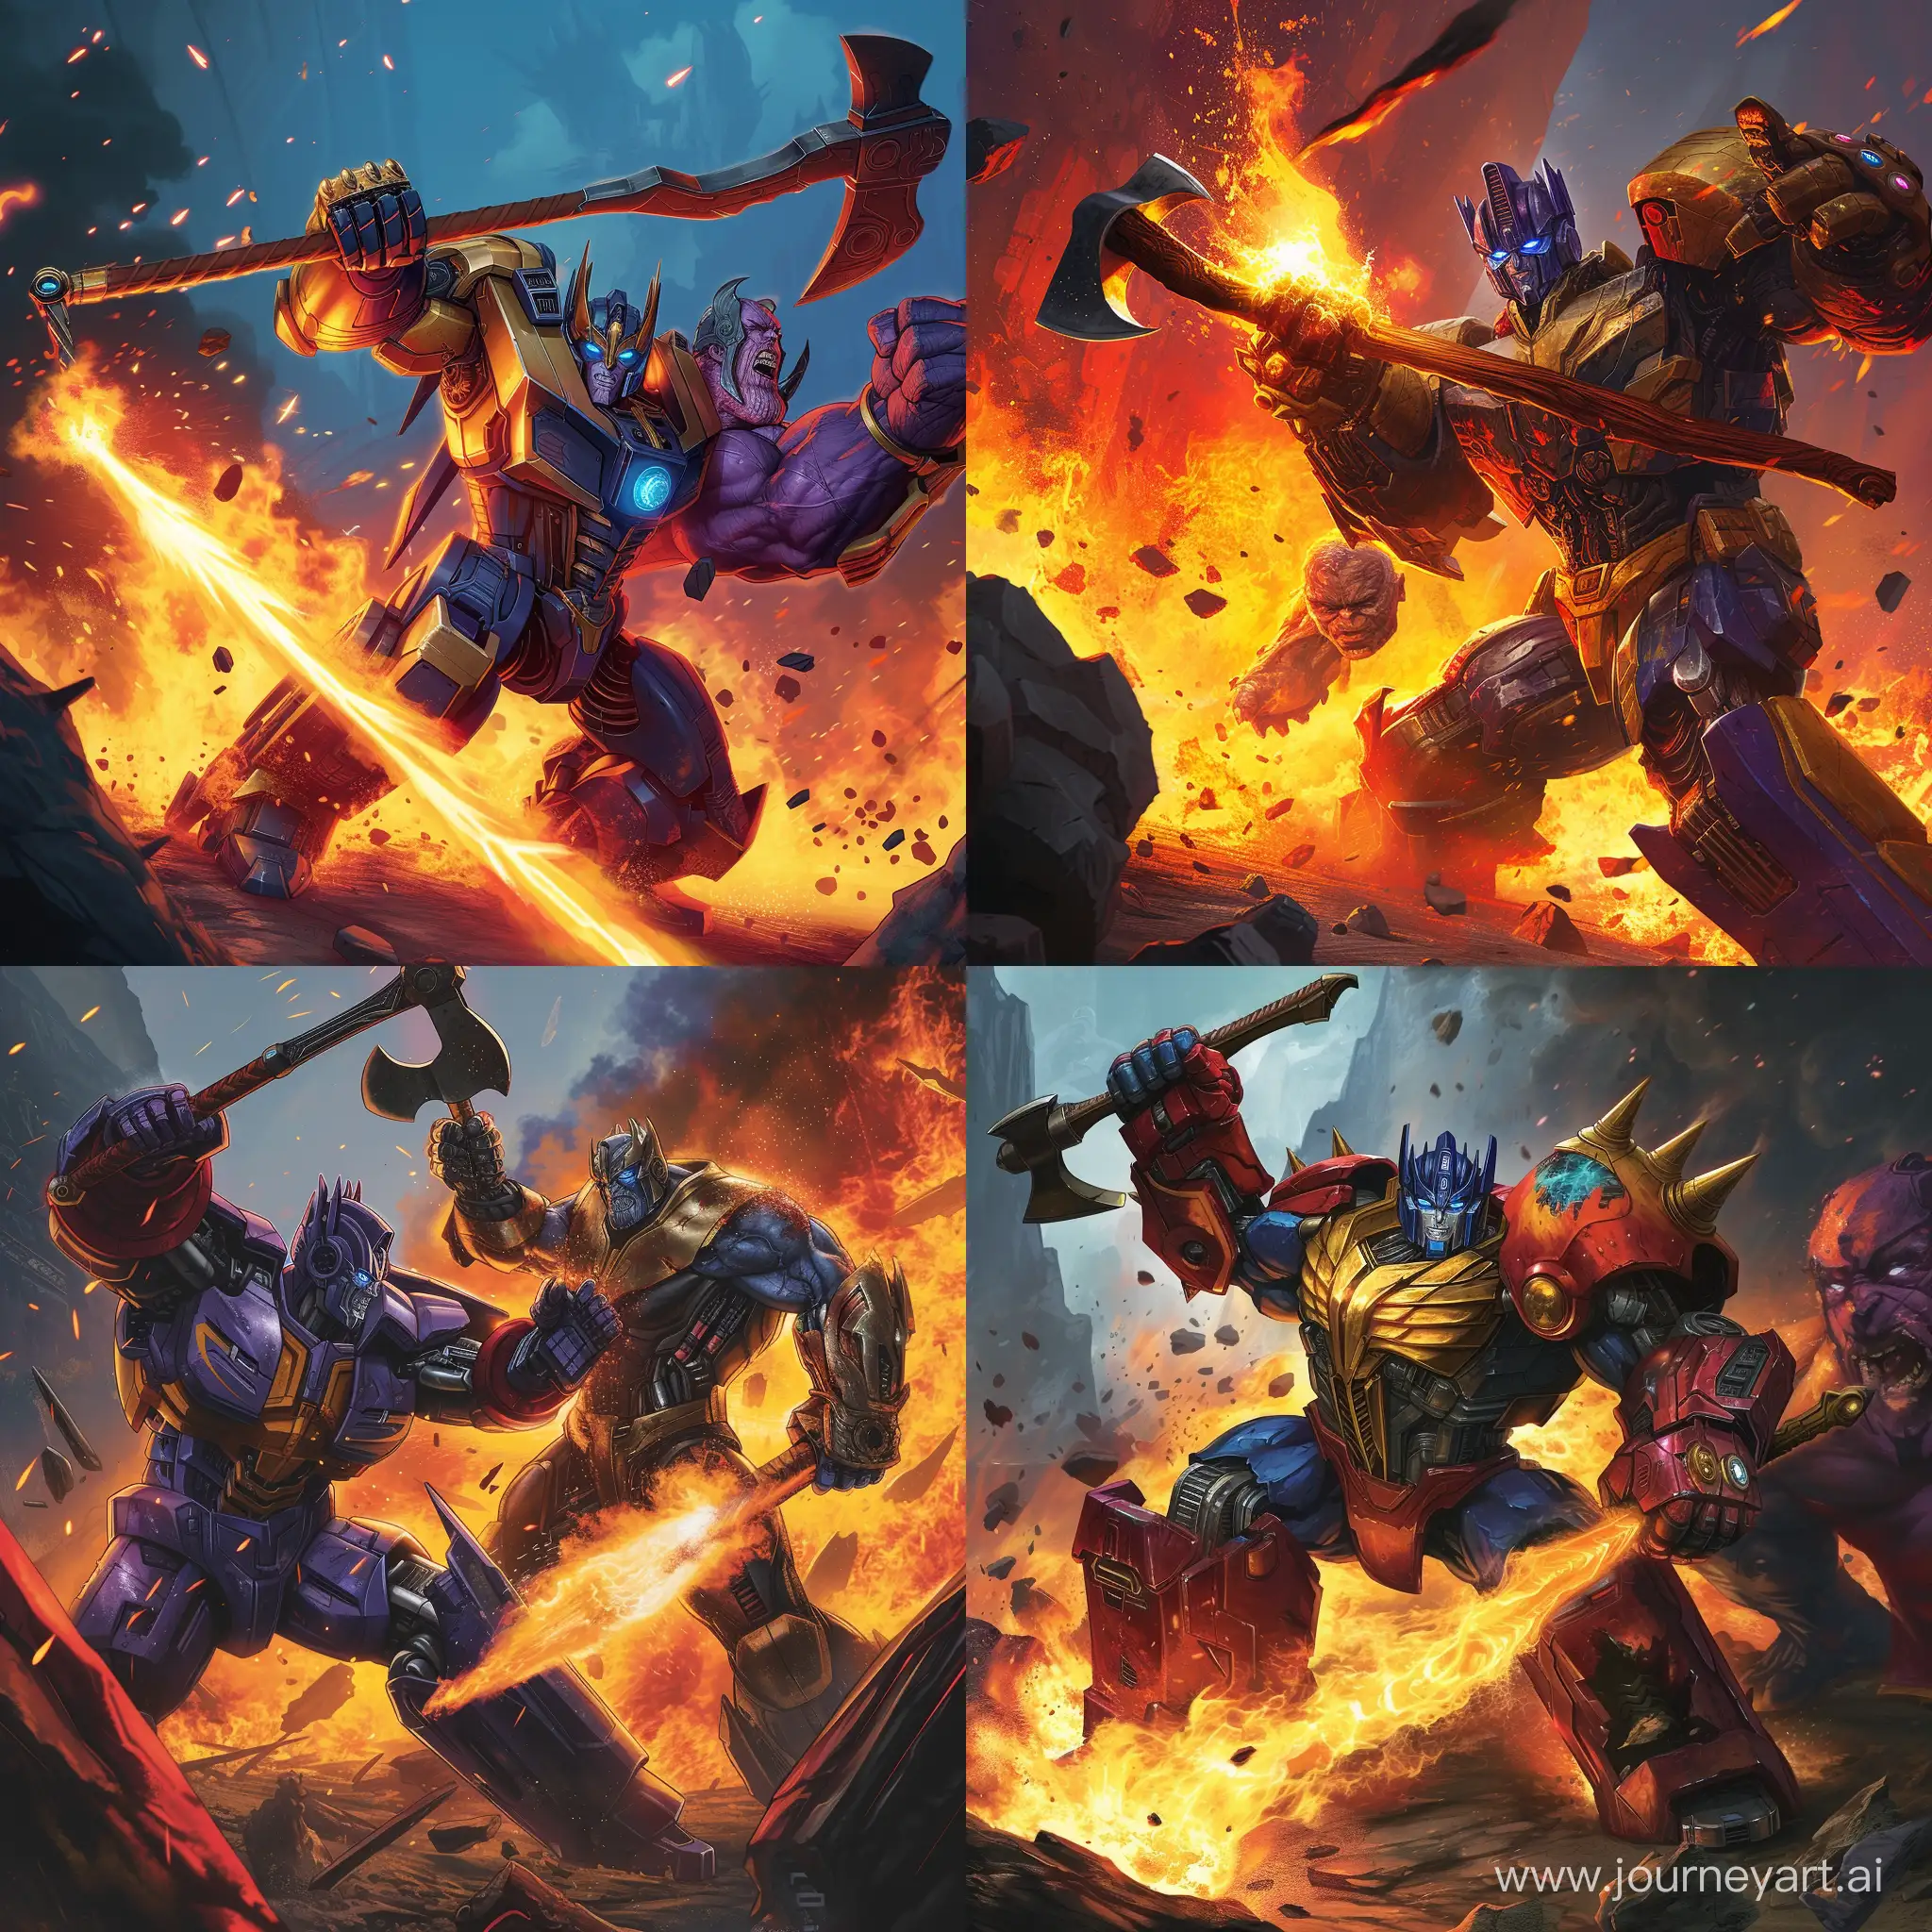 optimus prime (bayverse version) killing thanos with a fire sword and axe
